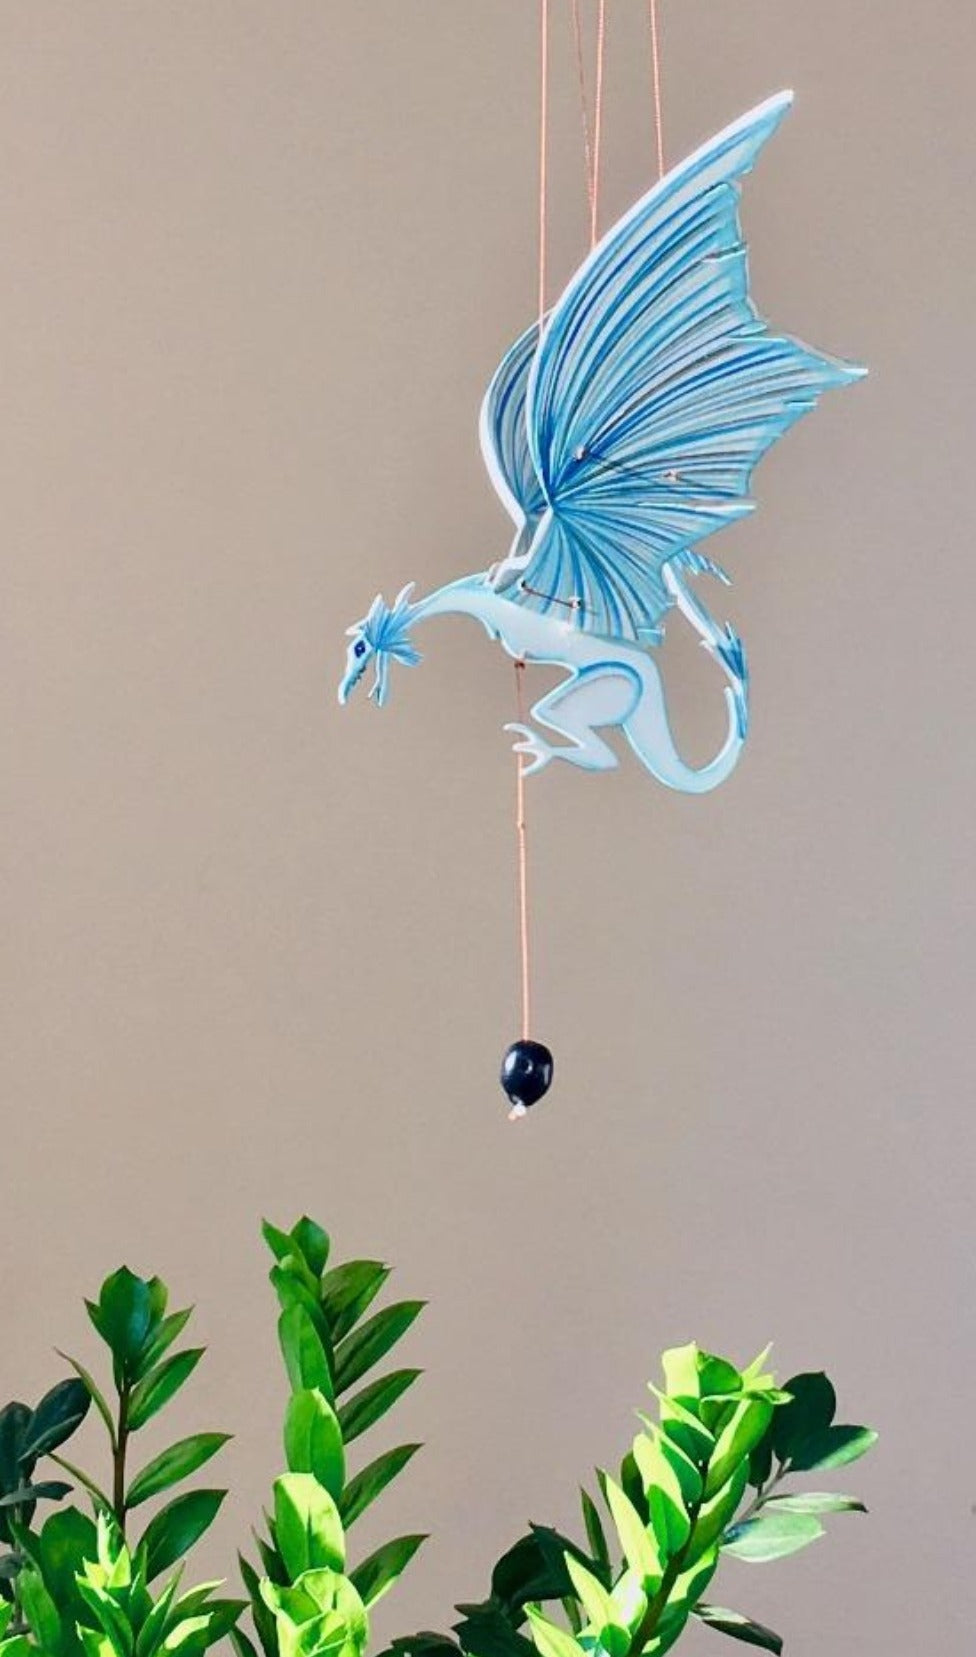 Ice Dragon Flying Mobile. Handmade & Hand painted in Colombia. Ethical Home Decor. Gift for Game of Thrones Fans.